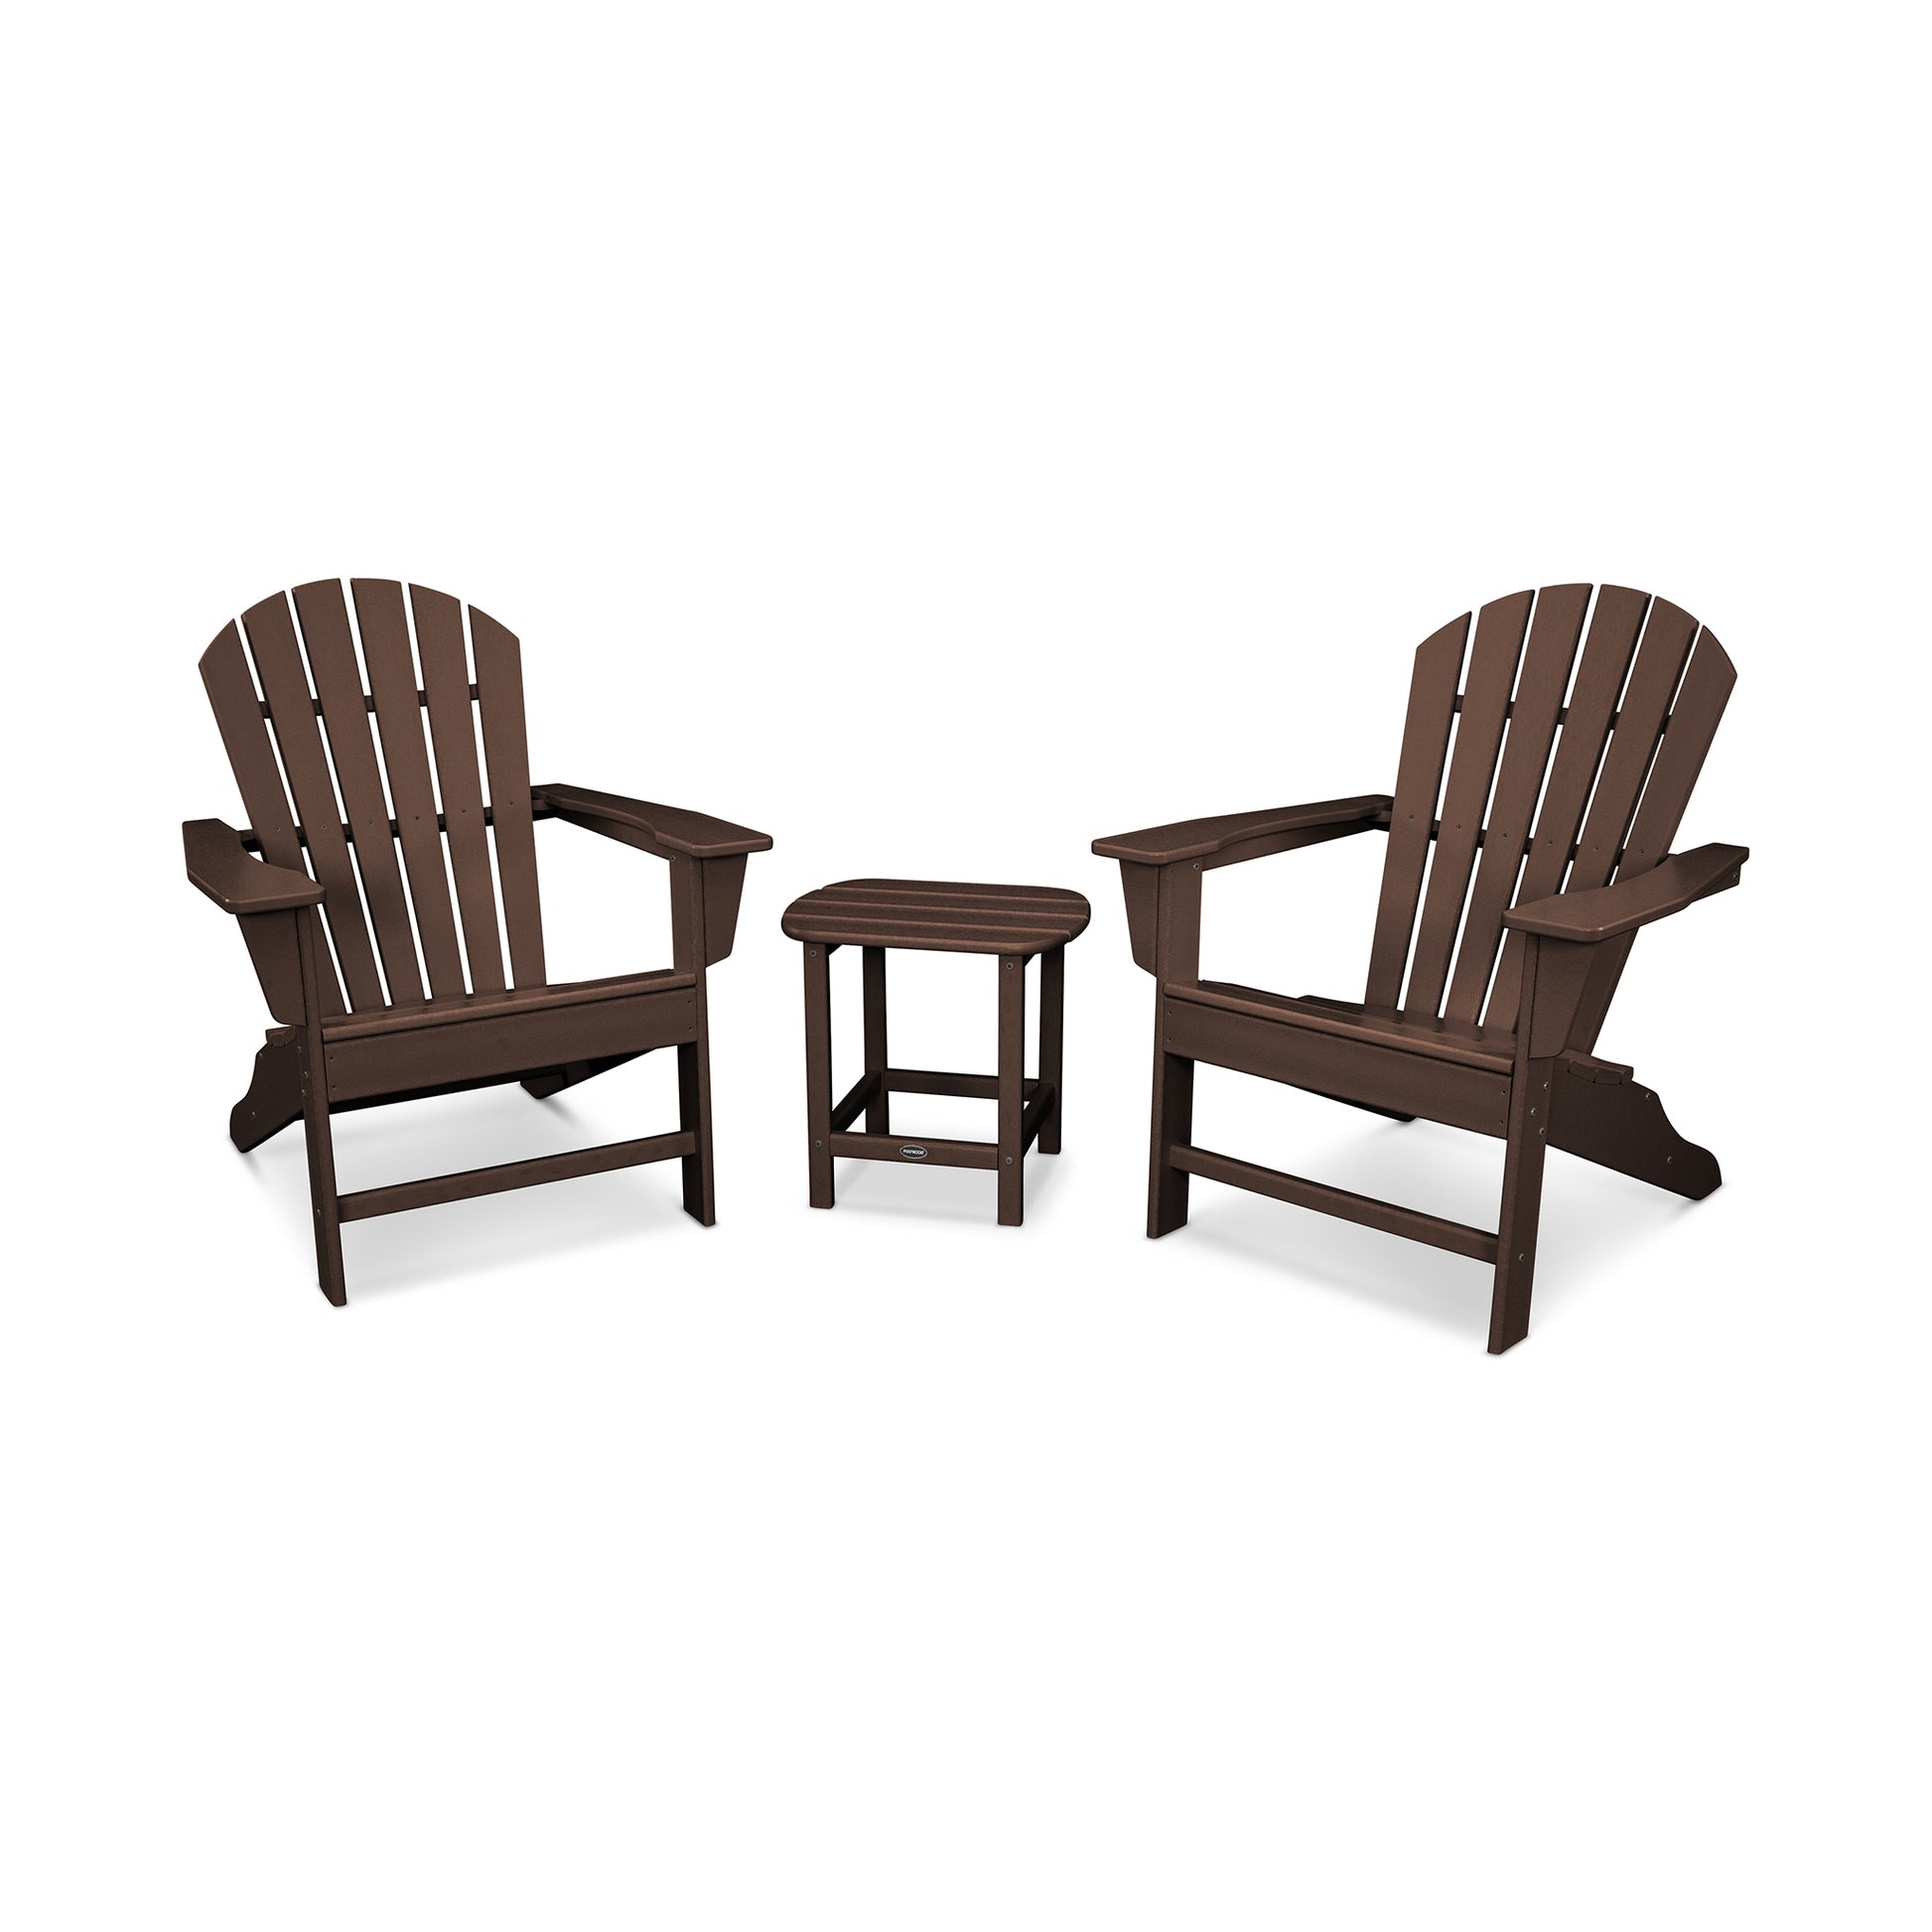 Two brown POLYWOOD South Beach Adirondack chairs with a matching small side table, arranged on a plain white background. The chairs are made of POLYWOOD lumber, have a slatted design, and